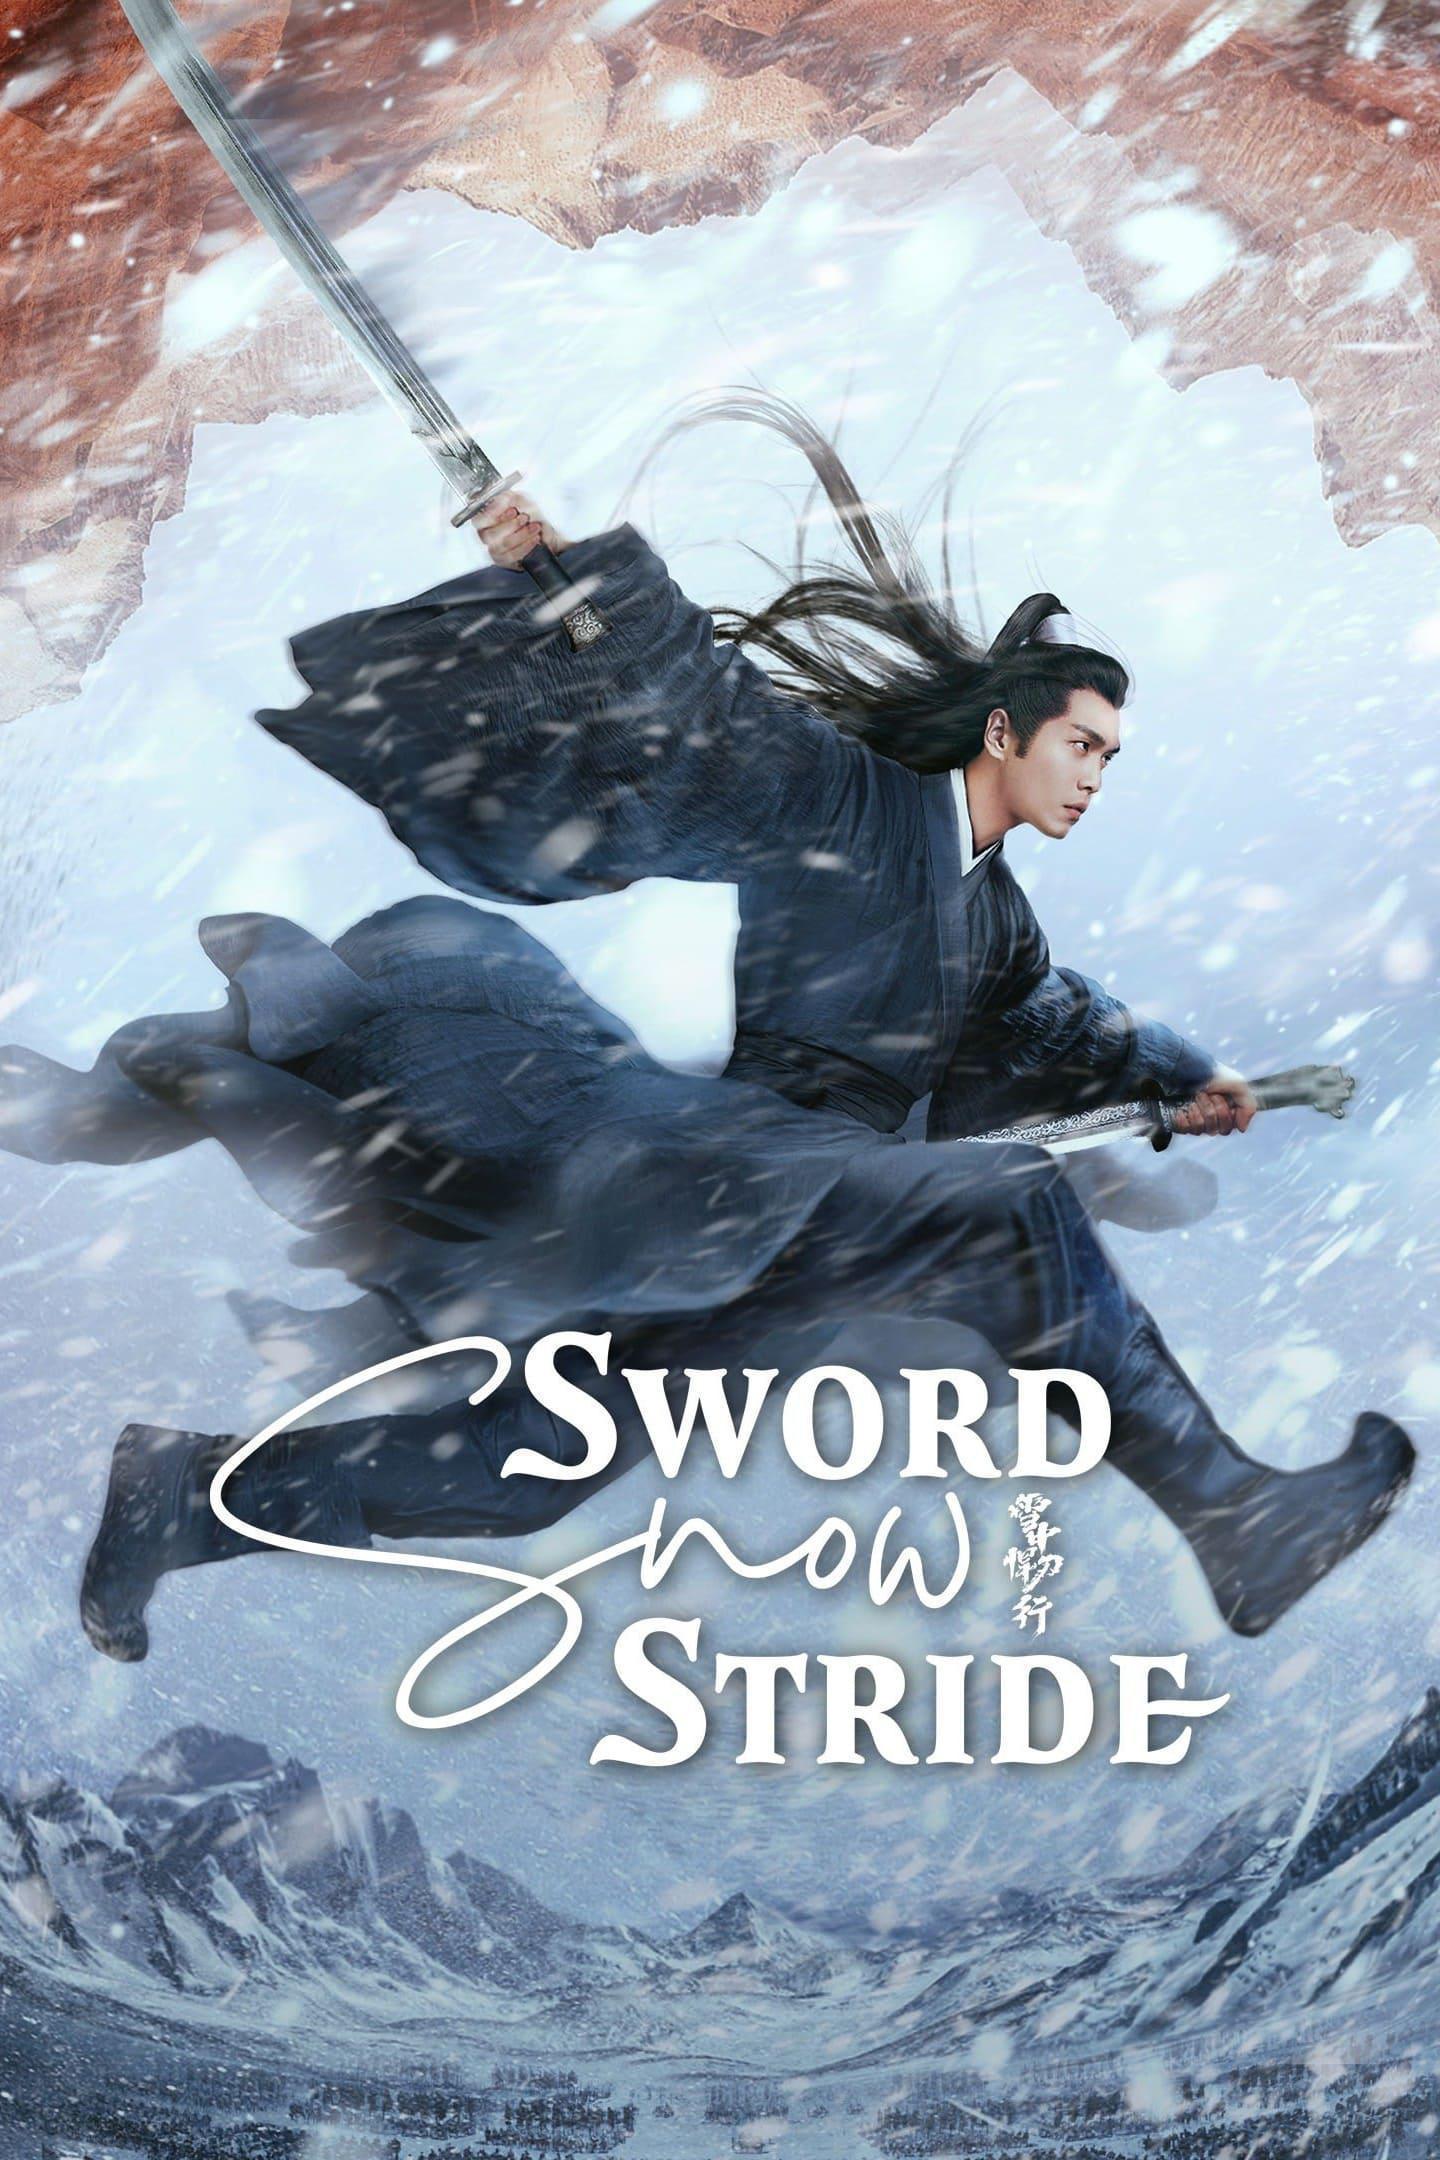 TV ratings for Sword Snow Stride (雪中悍刀行) in the United Kingdom. Tencent Video TV series